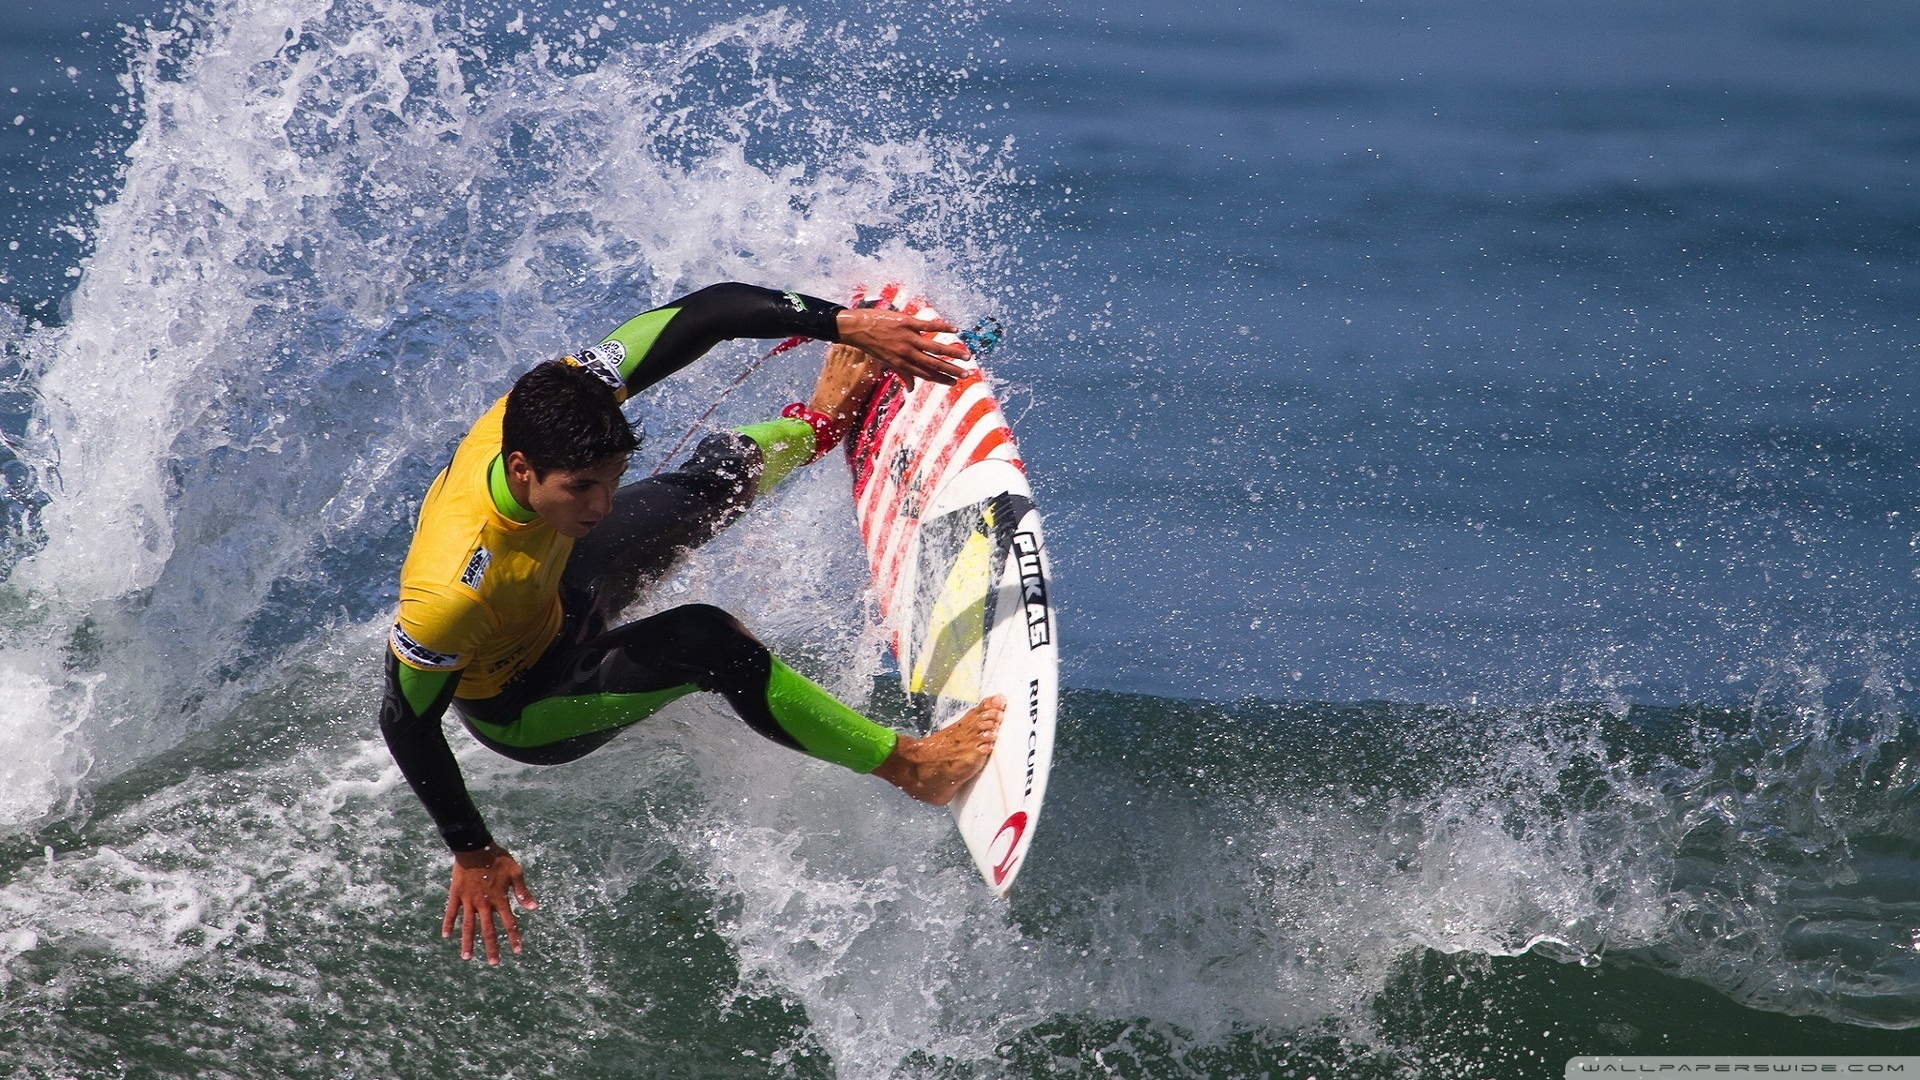 Riding The Wawe HD Wallpaper Sport Surfing Water Sports